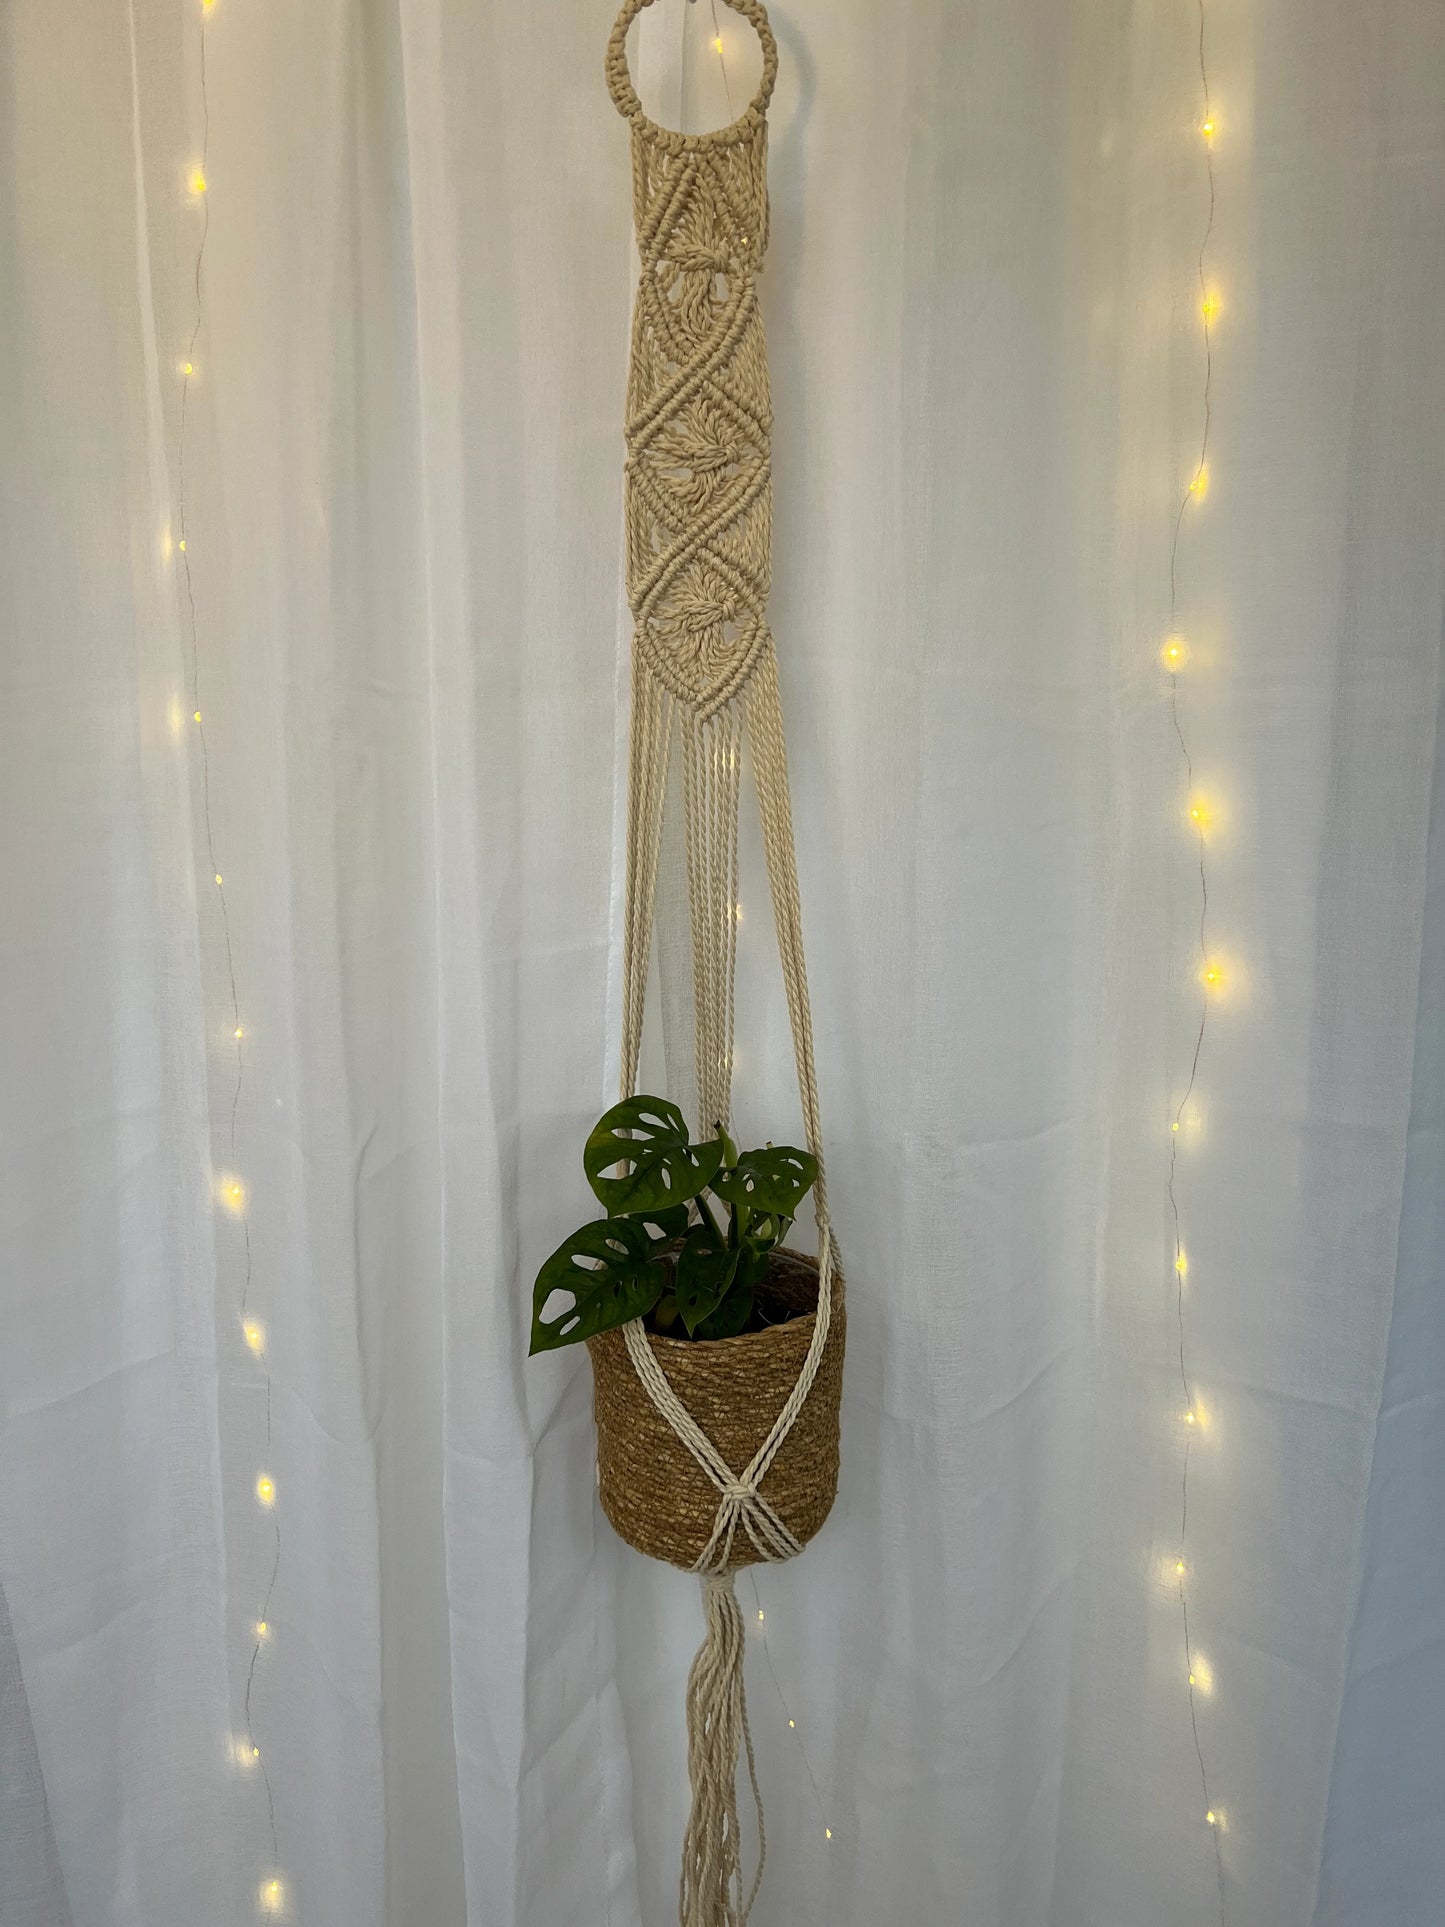 Monstera Monkey Mask Adansonii Plant (Swiss Cheese Plant) with Pot and Macramé Plant Hanger